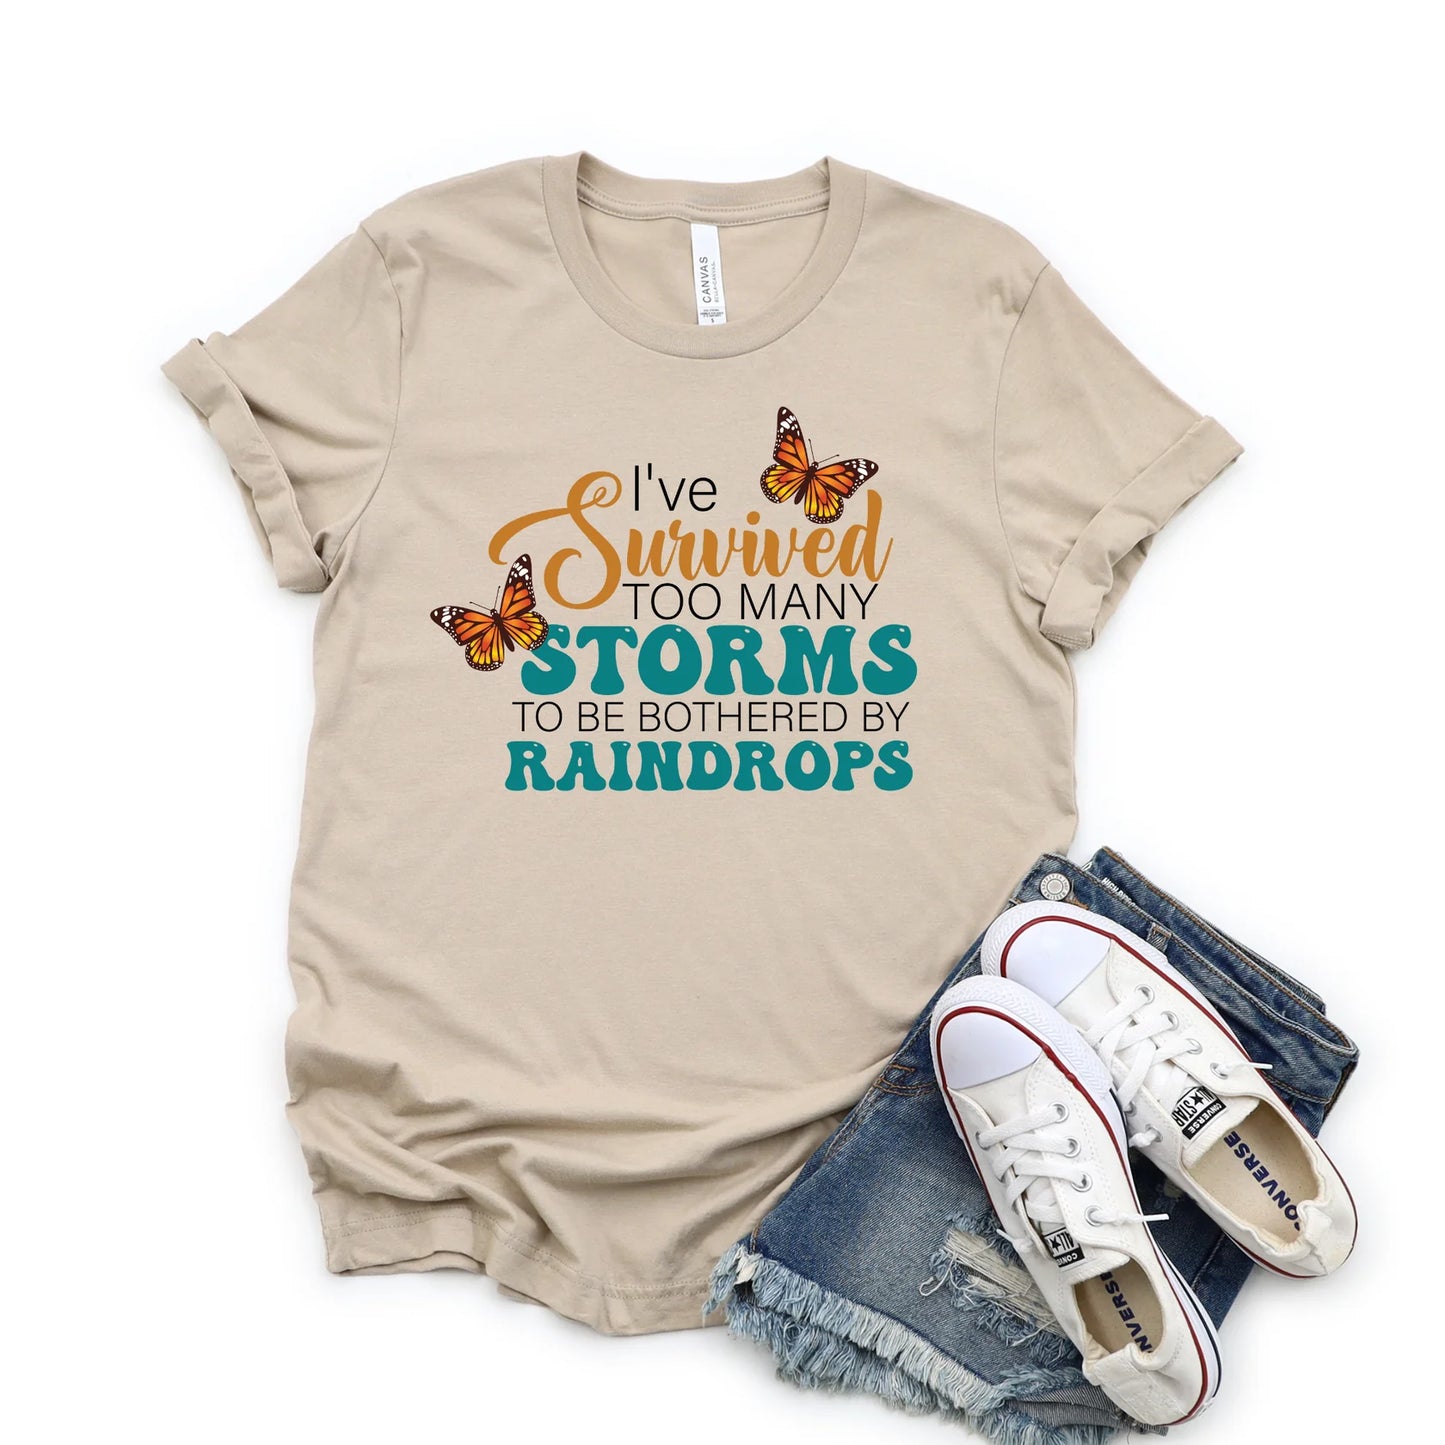 I’ve Survived Too Many Storms To Be Bothered By Raindrops Graphic Tee - 3 colors